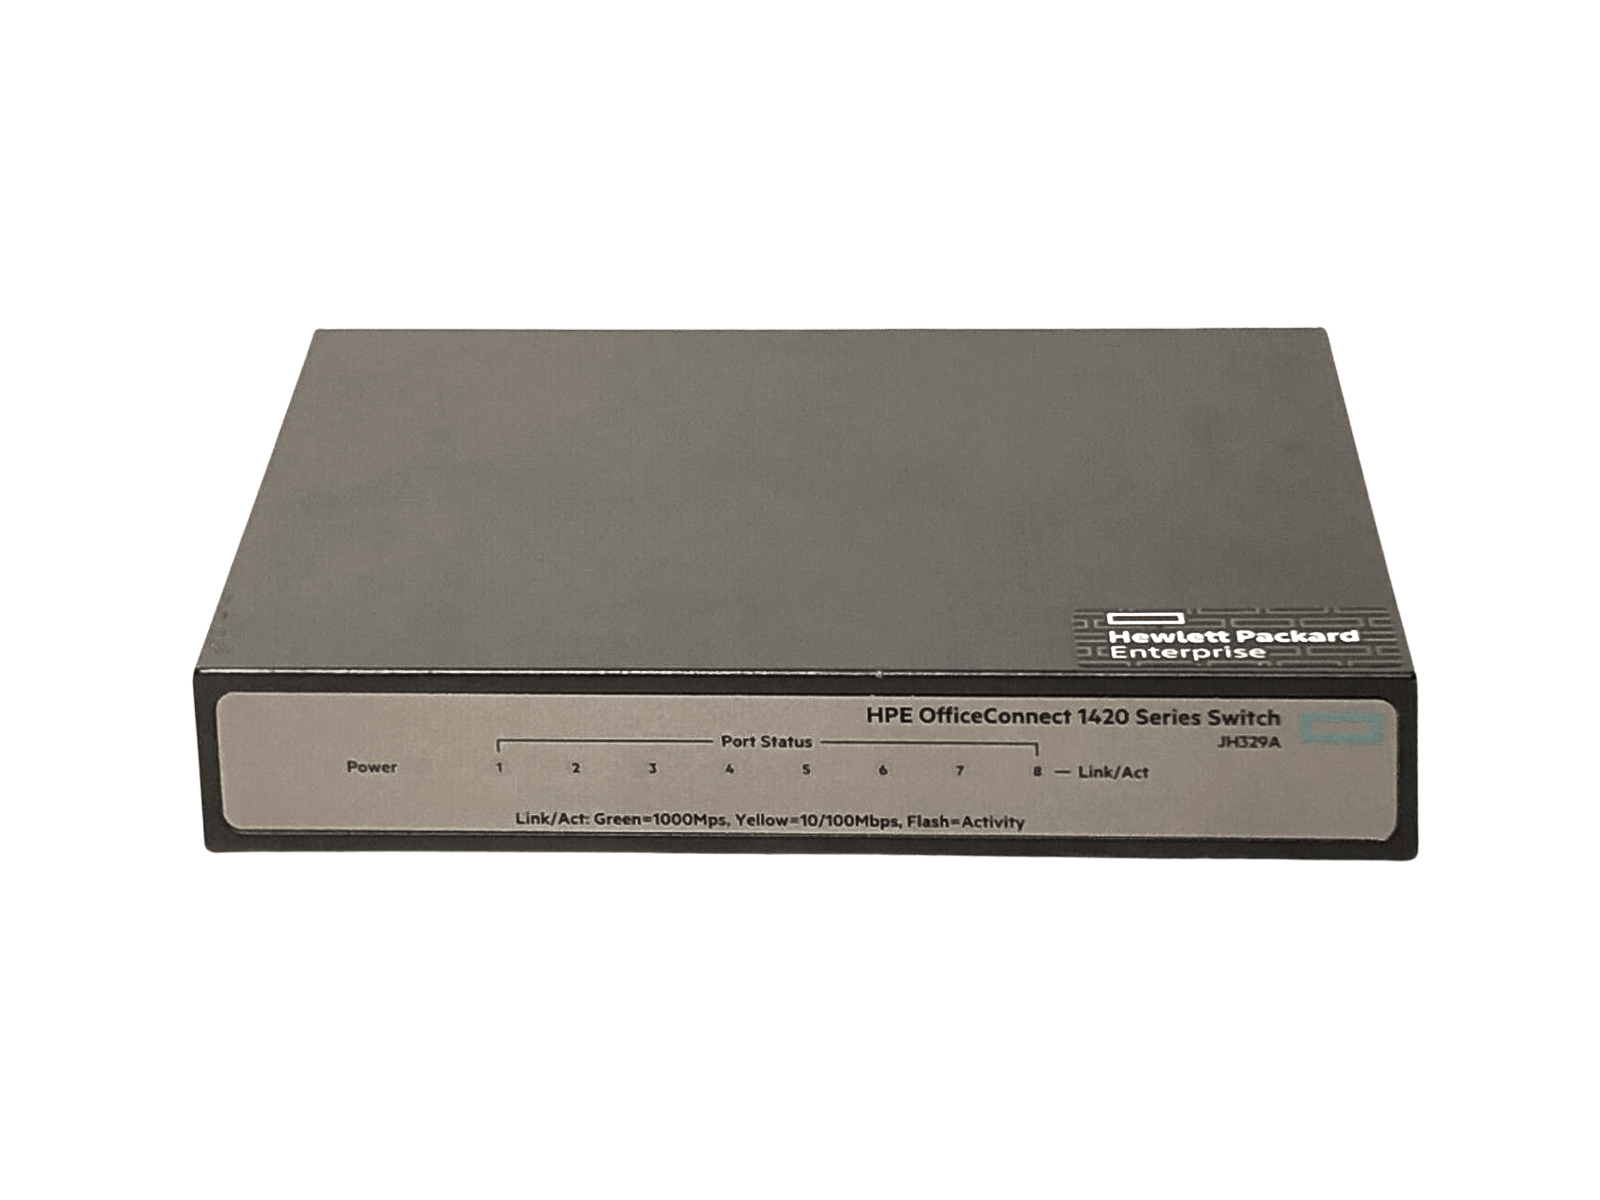 HPE JH329A OfficeConnect 1420 Ethernet Switch 8x 10/100/1000 RJ-45 Ports.